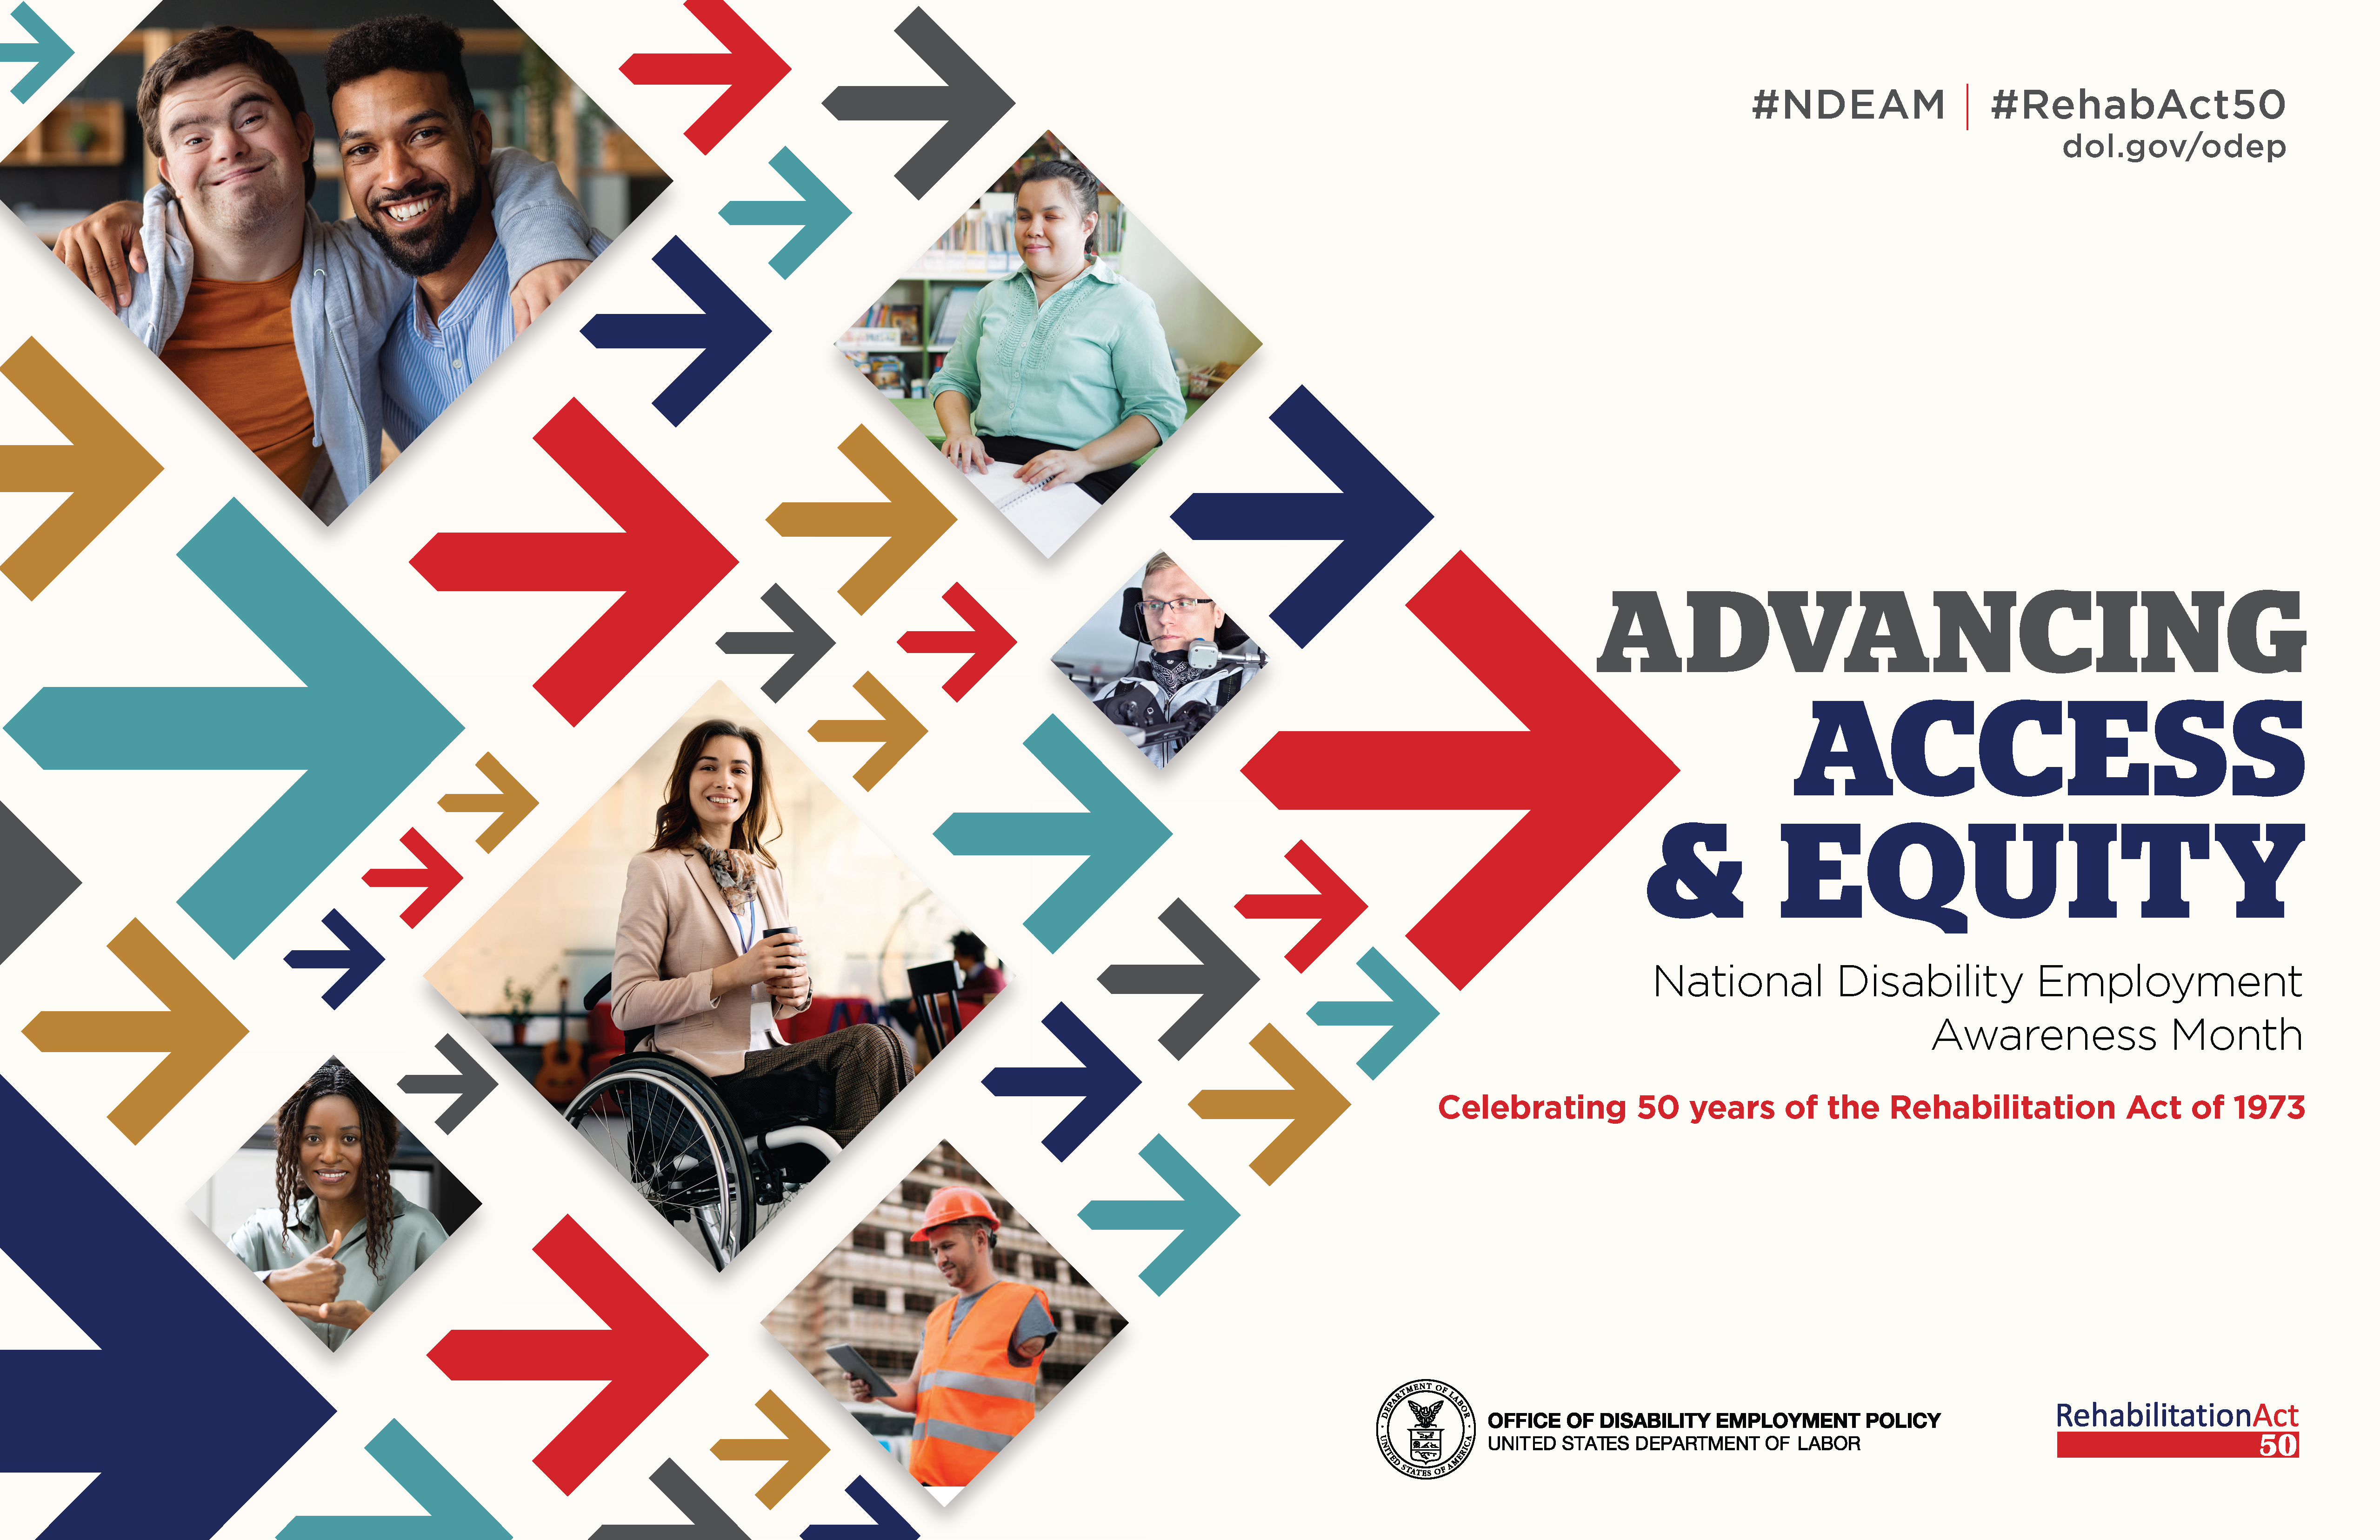 he poster is rectangular in shape with a white background. The words, “Advancing Access & Equity, National Disability Employment Awareness Month, Celebrating 50 years of the Rehabilitation Act of 1973” are placed to the right of a field of red, gray, teal, blue and yellow arrows. Mixed within the arrows are diverse images of people with disabilities in workplace settings. Along the top in small gray letters are the hashtags “NDEAM” and “RehabAct50” followed by the website address, dol.gov/ODEP. In the lower right corner is the DOL seal followed by the words “Office of Disability Employment Policy, United States Department of Labor” as well as the Rehabilitation Act 50 logo.